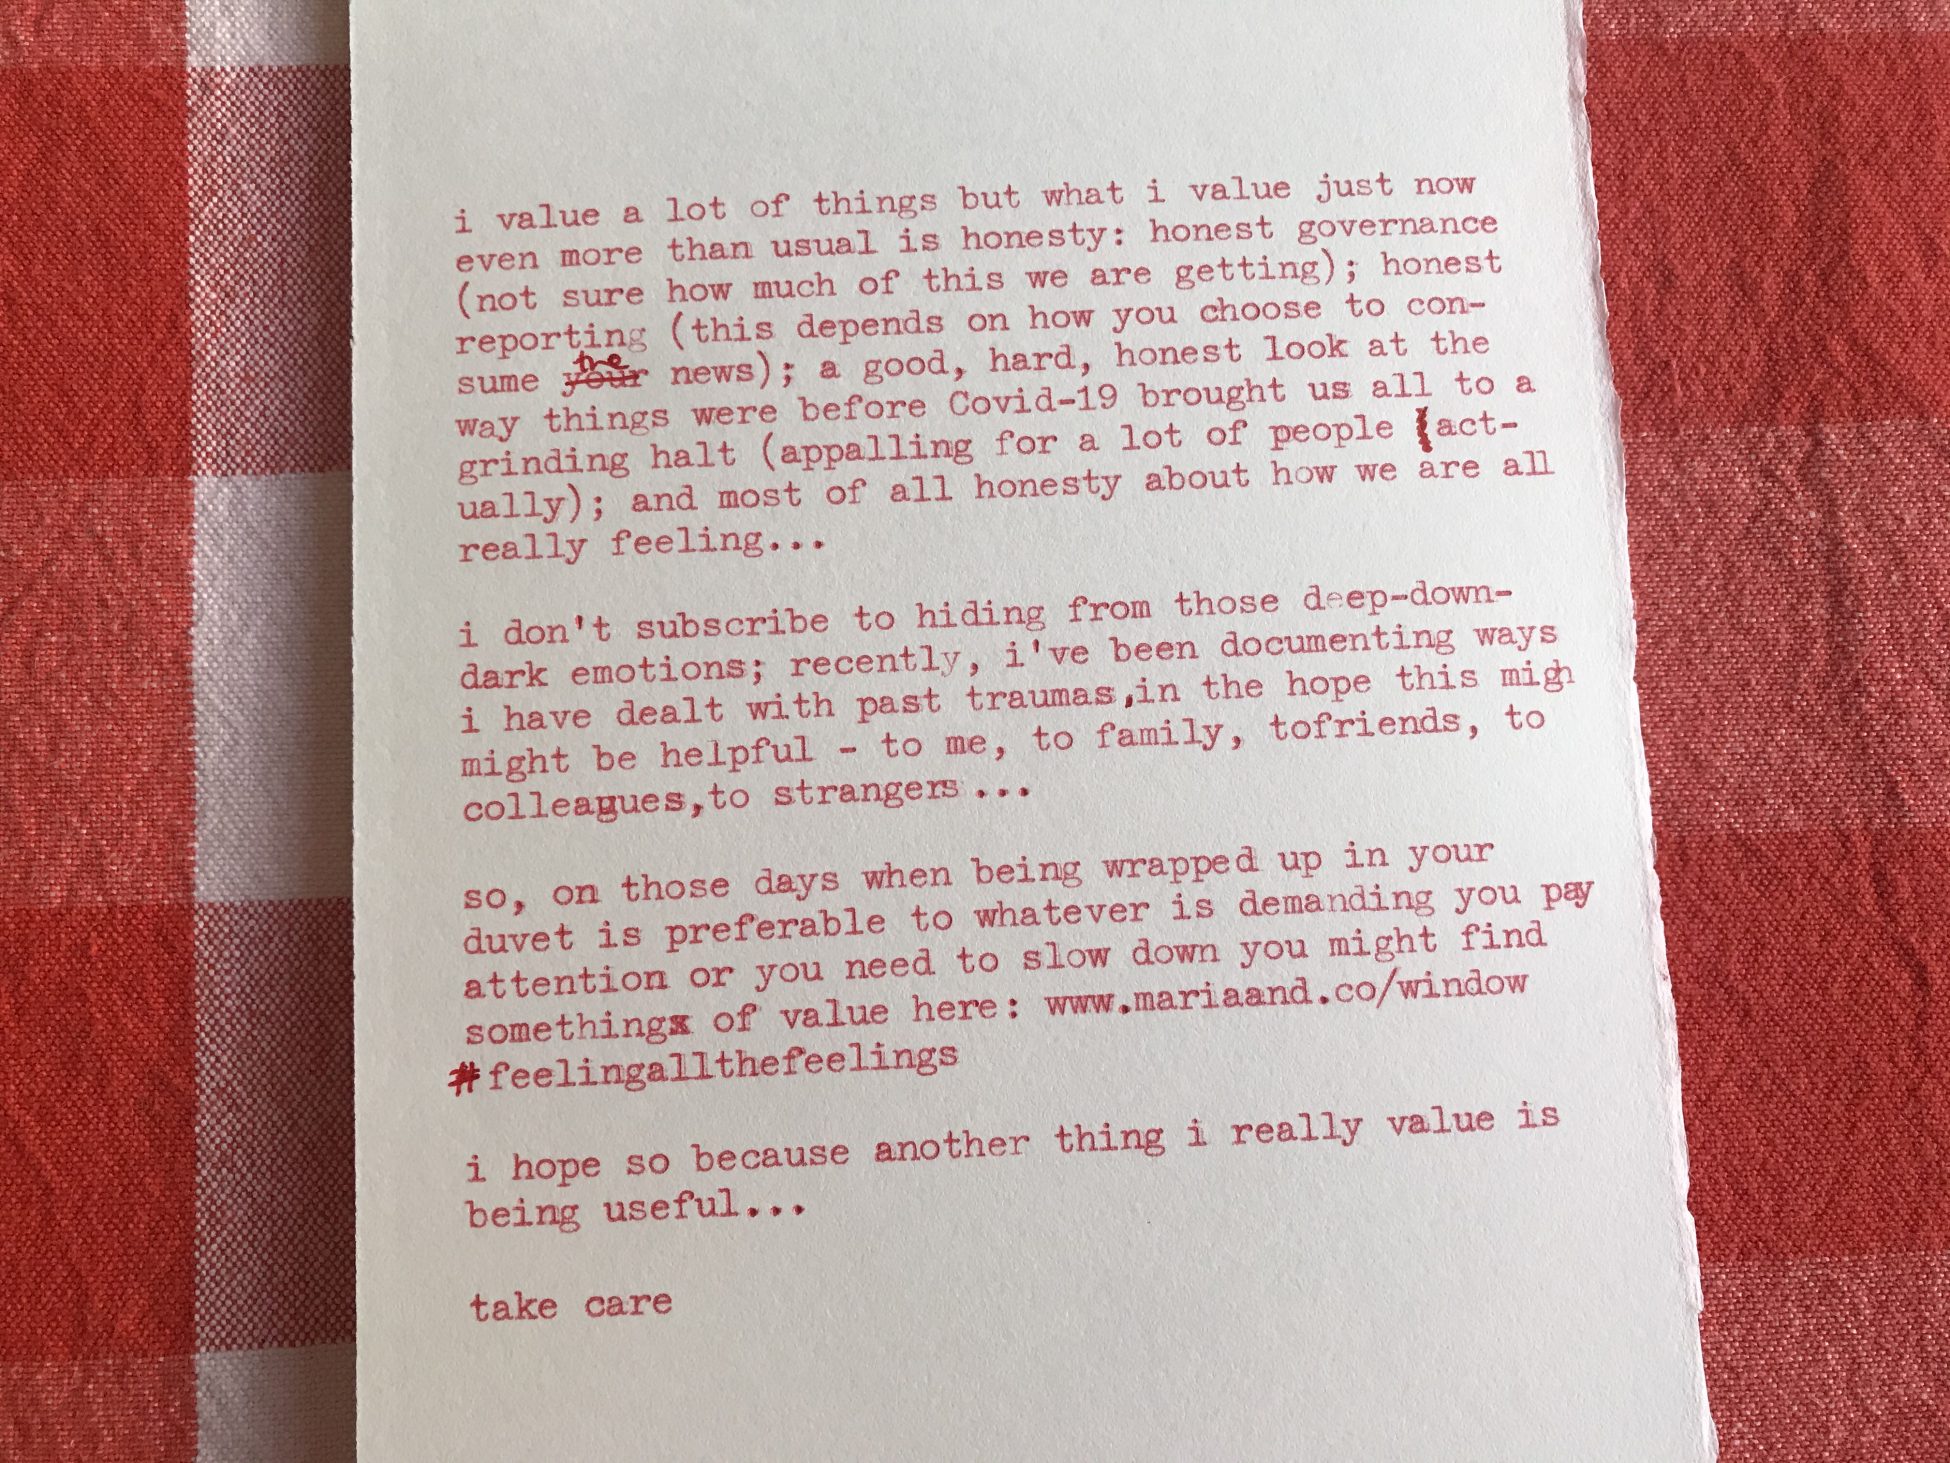 Blog piece which has been typed in red ink on a typewriter and corrected by hand in red pen, the paper is lying on a red gingham cloth. A transcription is provided below this image.